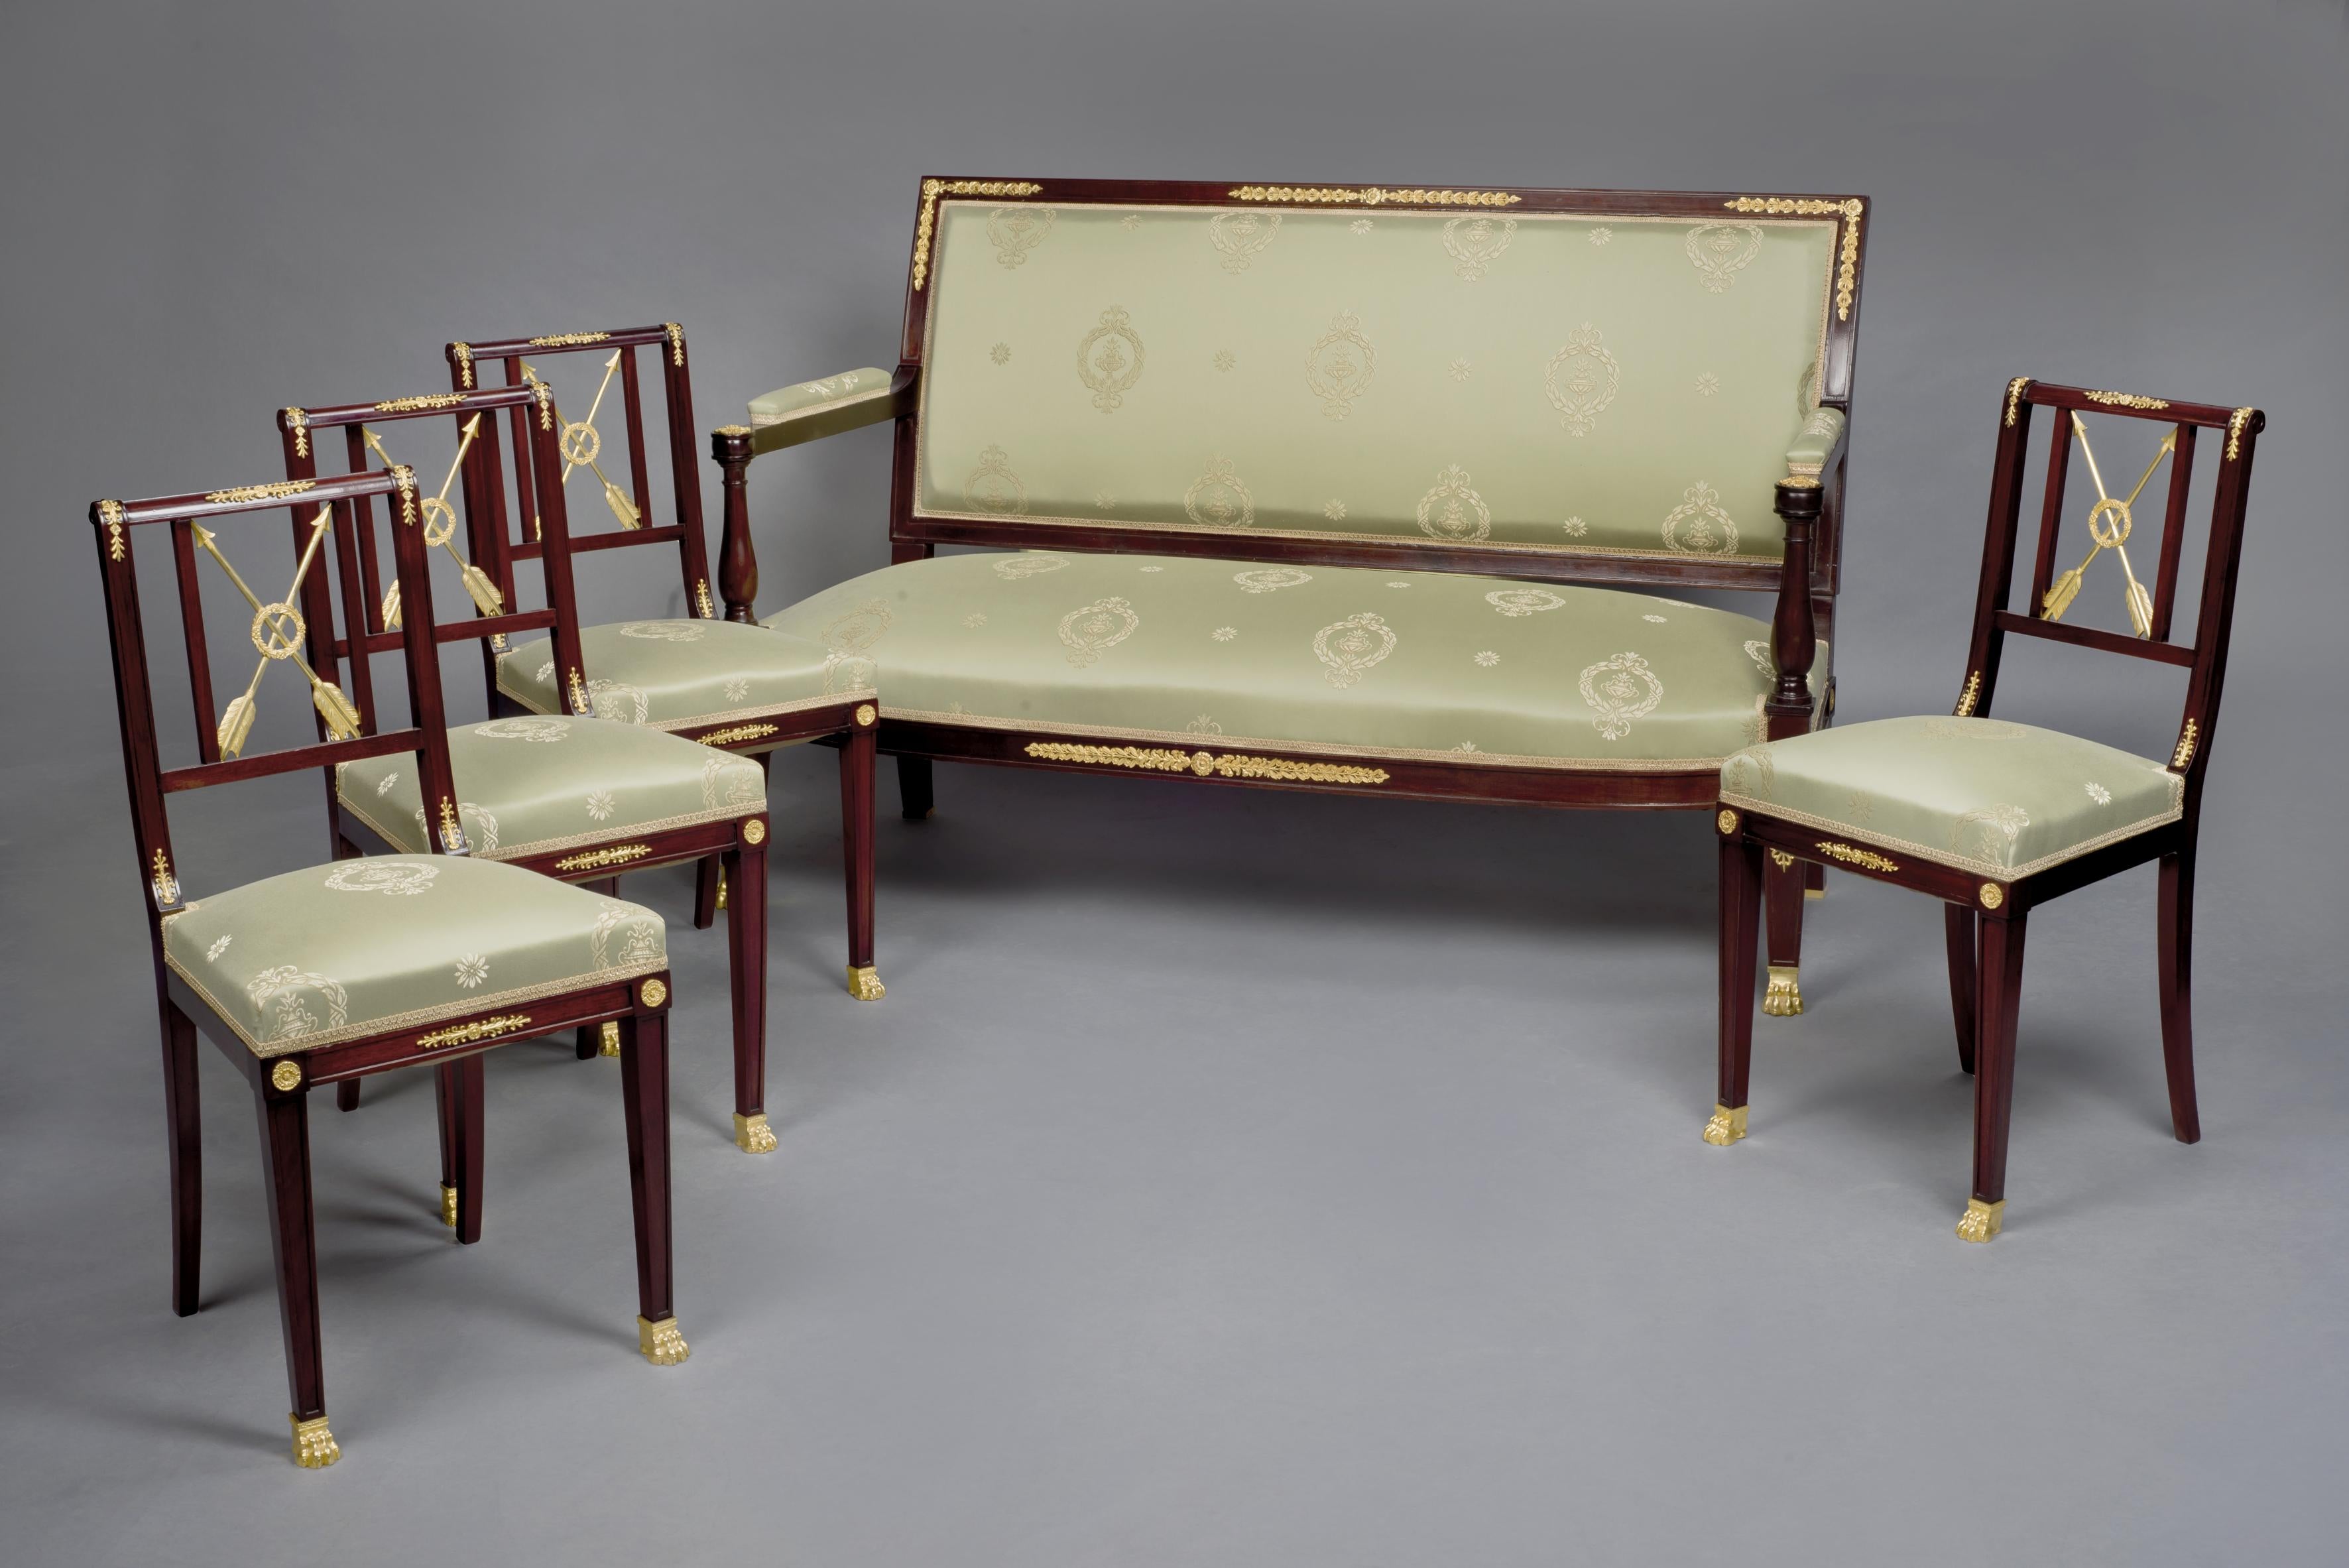 A rare gilt-bronze mounted mahogany Empire Revival salon suite by François Linke. 

French, circa 1910.

Stamped to the reverse of the bronze mounts ‘FL’. 

The original tacking underneath the chairs stencilled 'LINKE PARIS'.

The salon